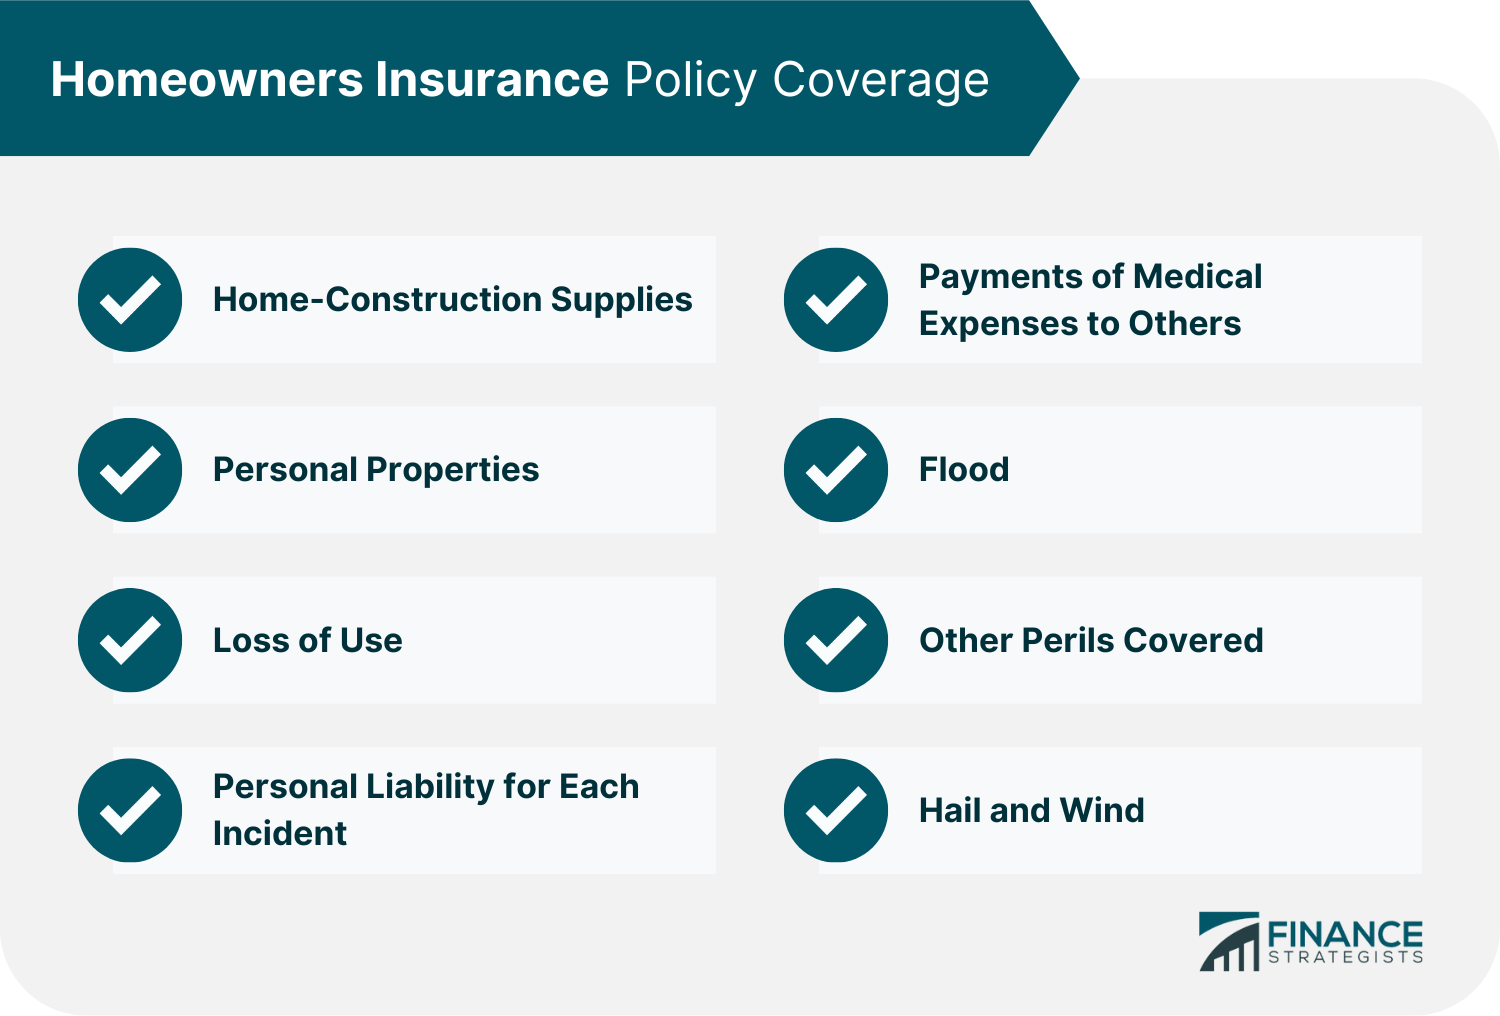 Homeowners Insurance Policy Coverage